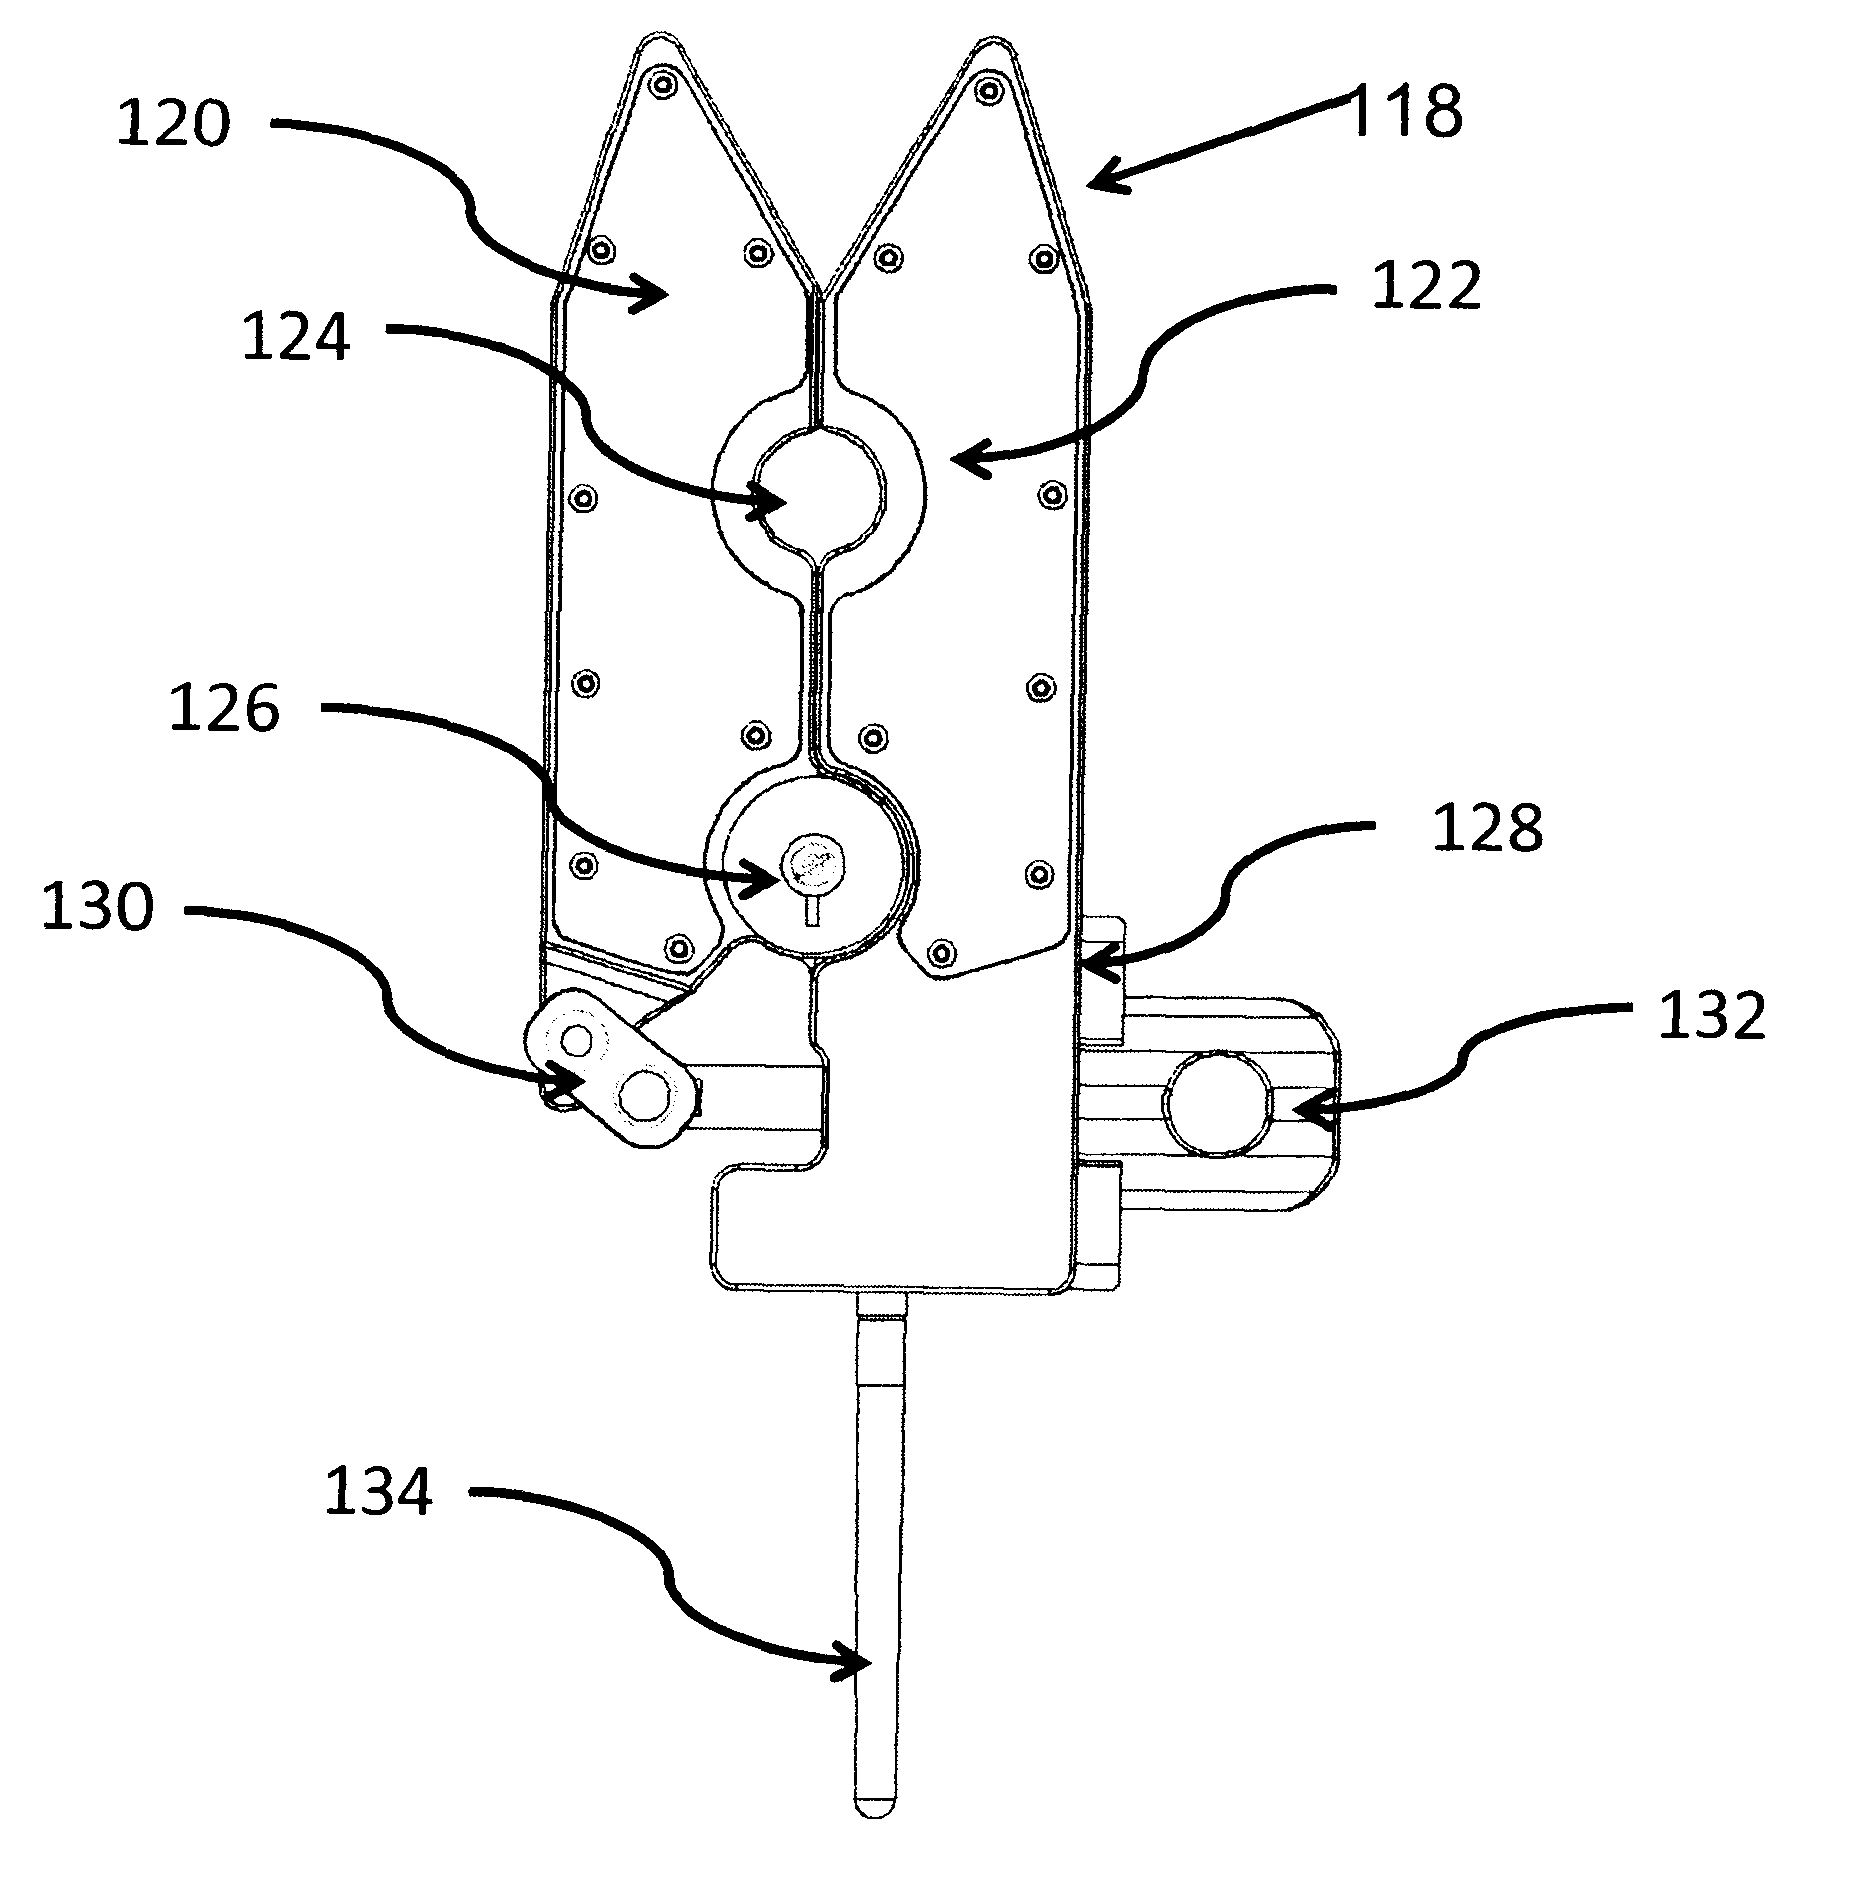 Method, Sensor Apparatus and System for Determining Losses in an Electrical Power Grid